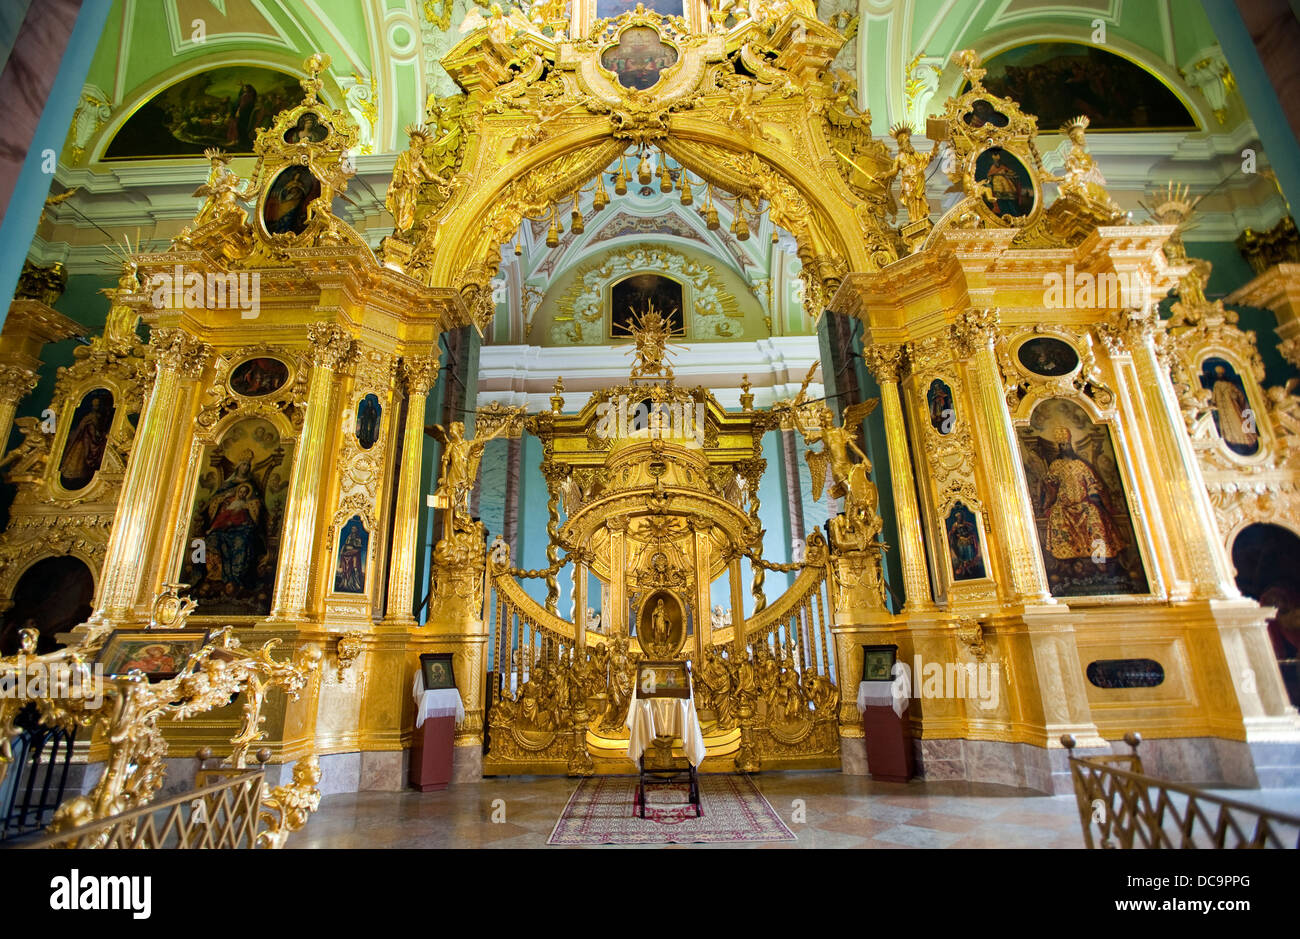 Interior of Saints Peter Paul Cathedral, St.Petersburg, Russia Stock Photo